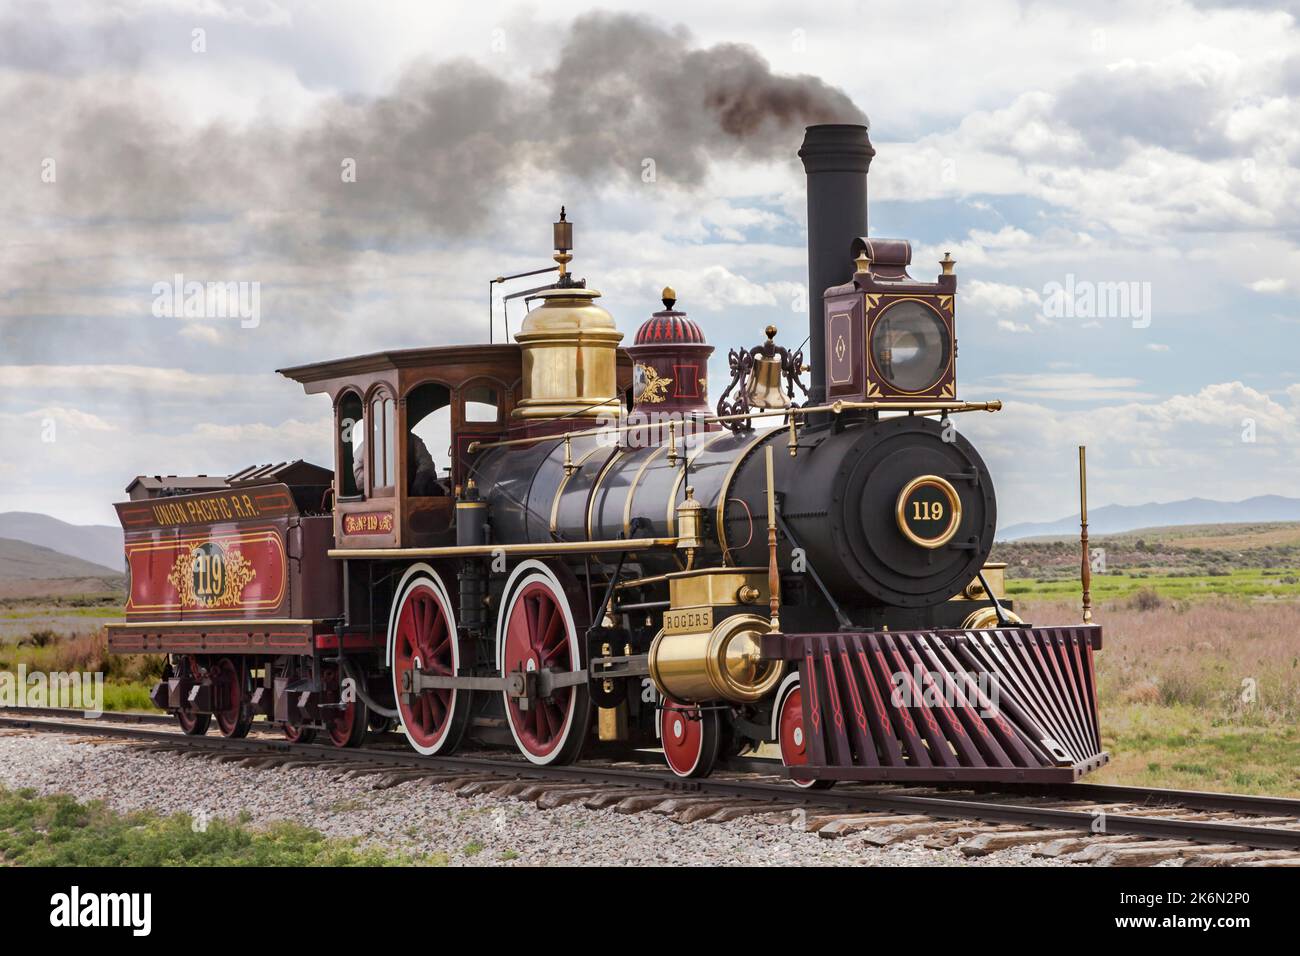 The Union Pacific Railroad's locomotive No. 119 belches steam as it rolls down the tracks at Promentory National Park in Utah. Stock Photo